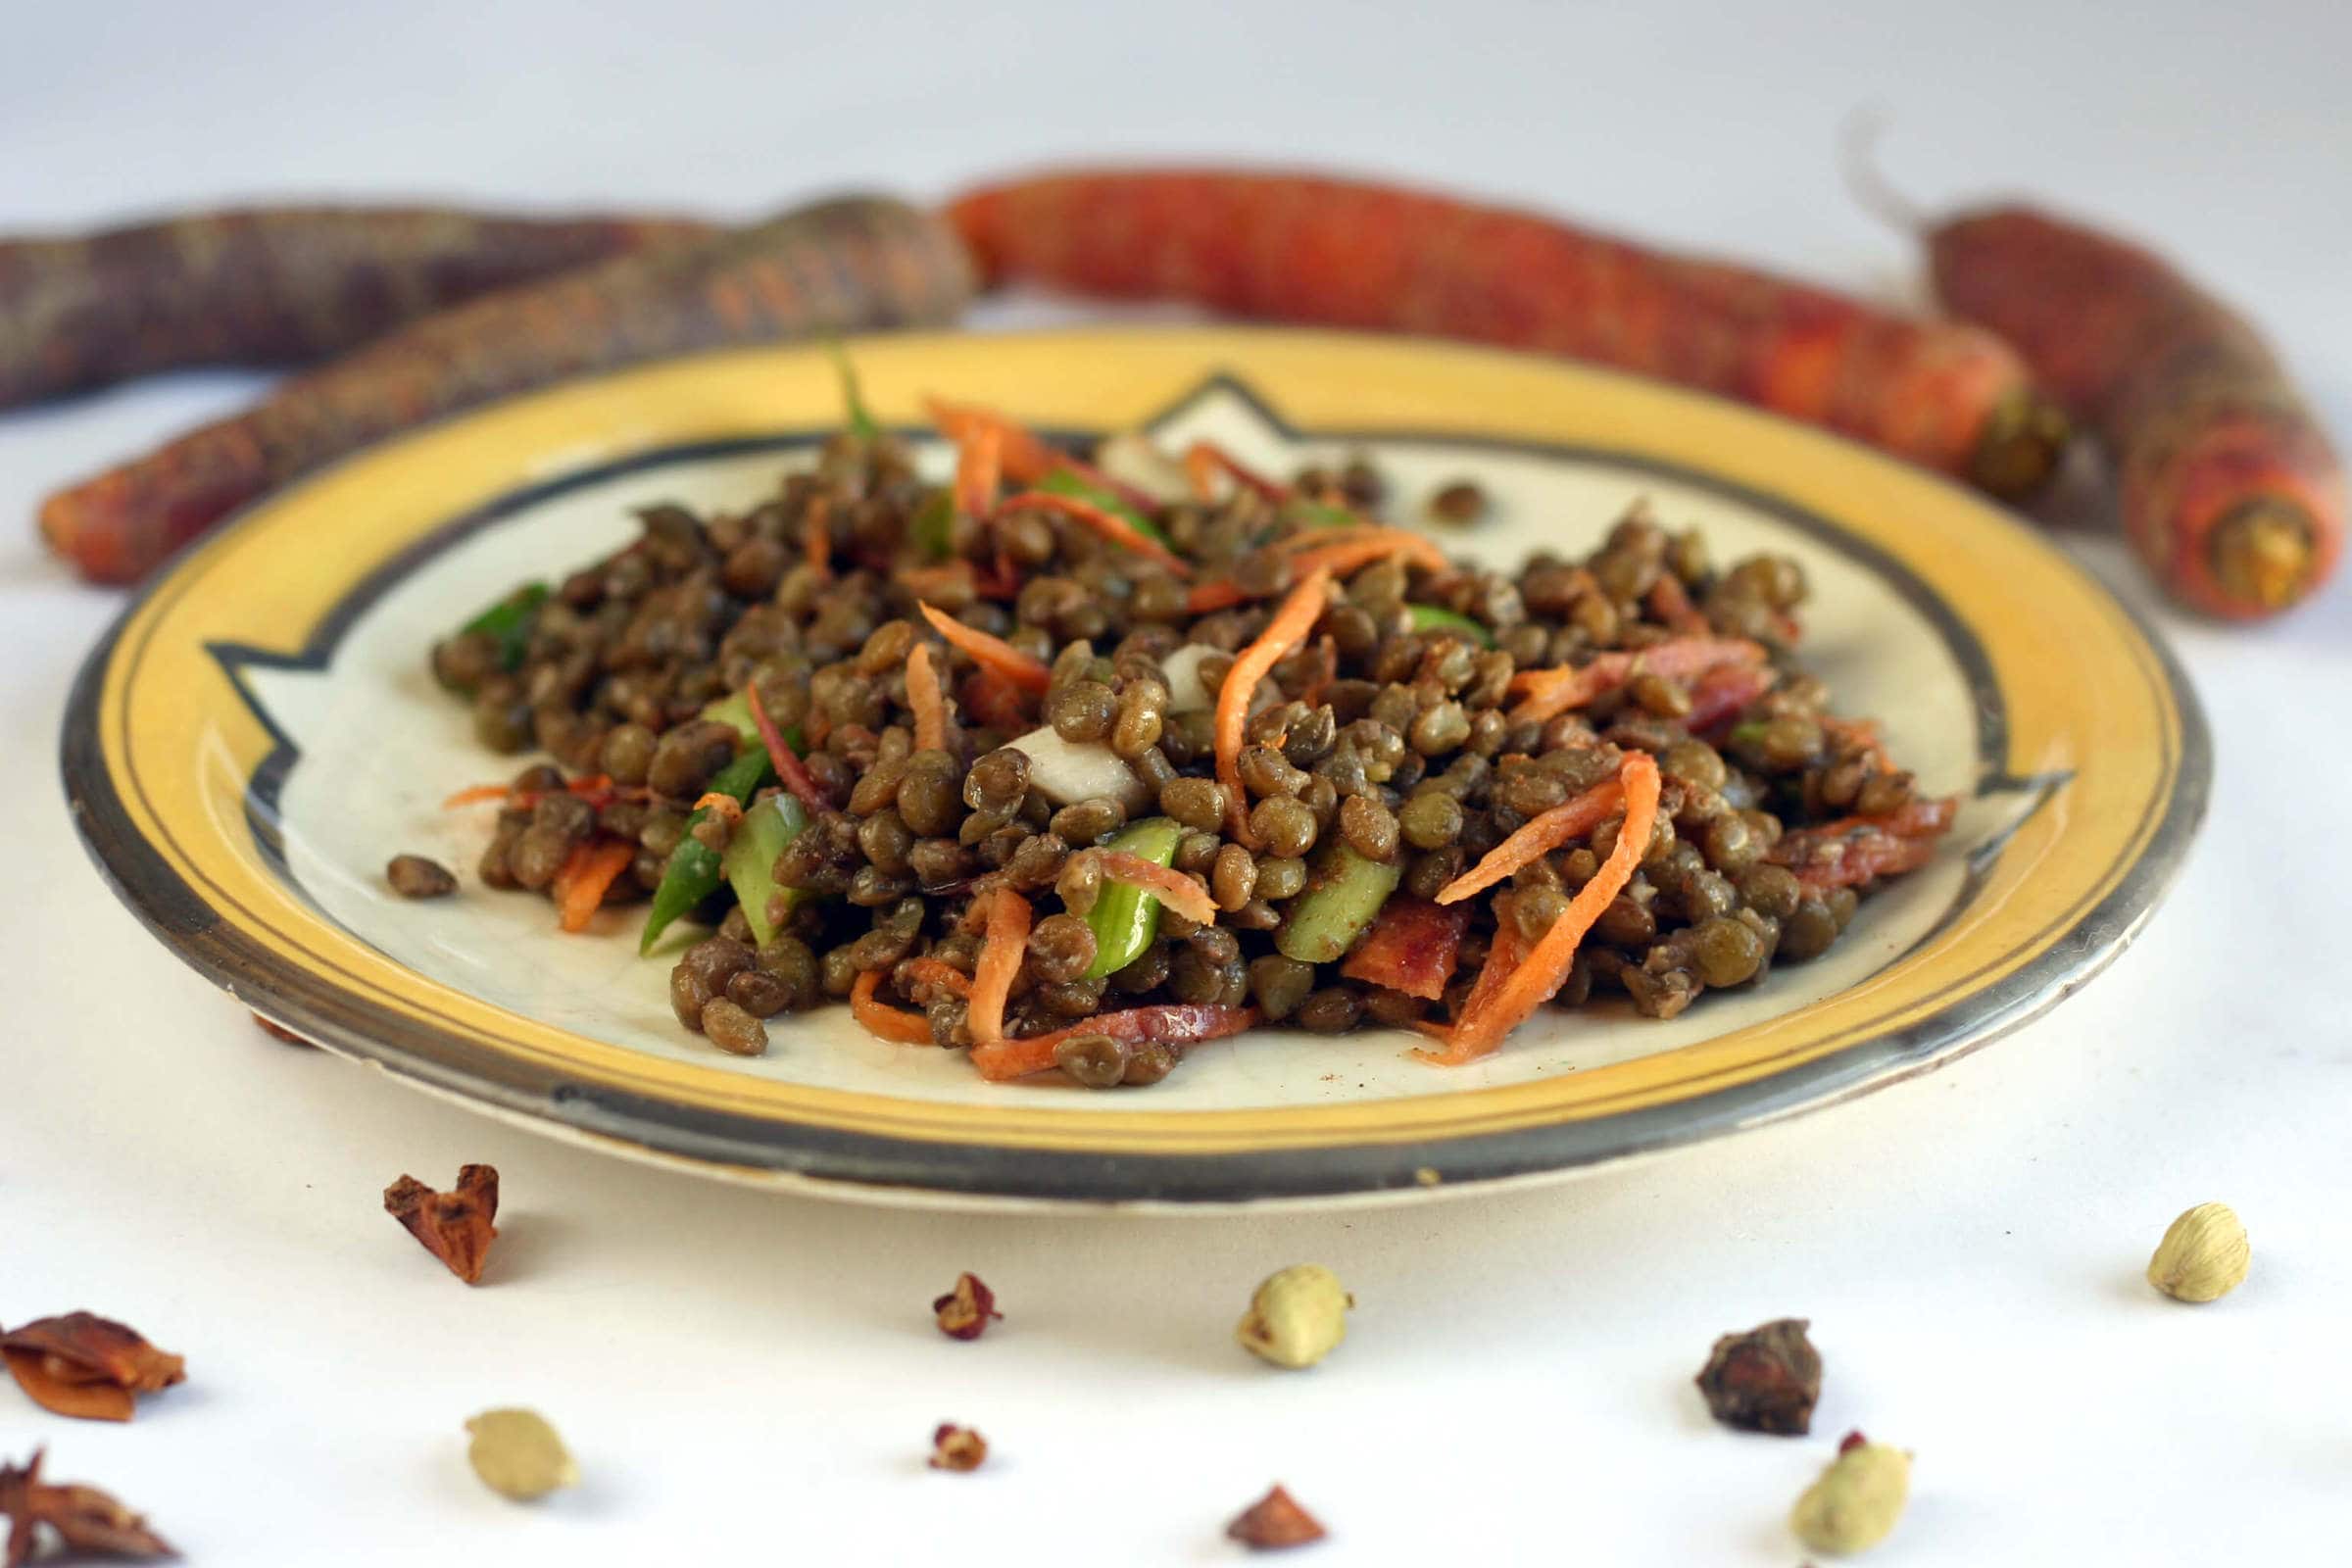 Lentil salad with Chinese 5 spice